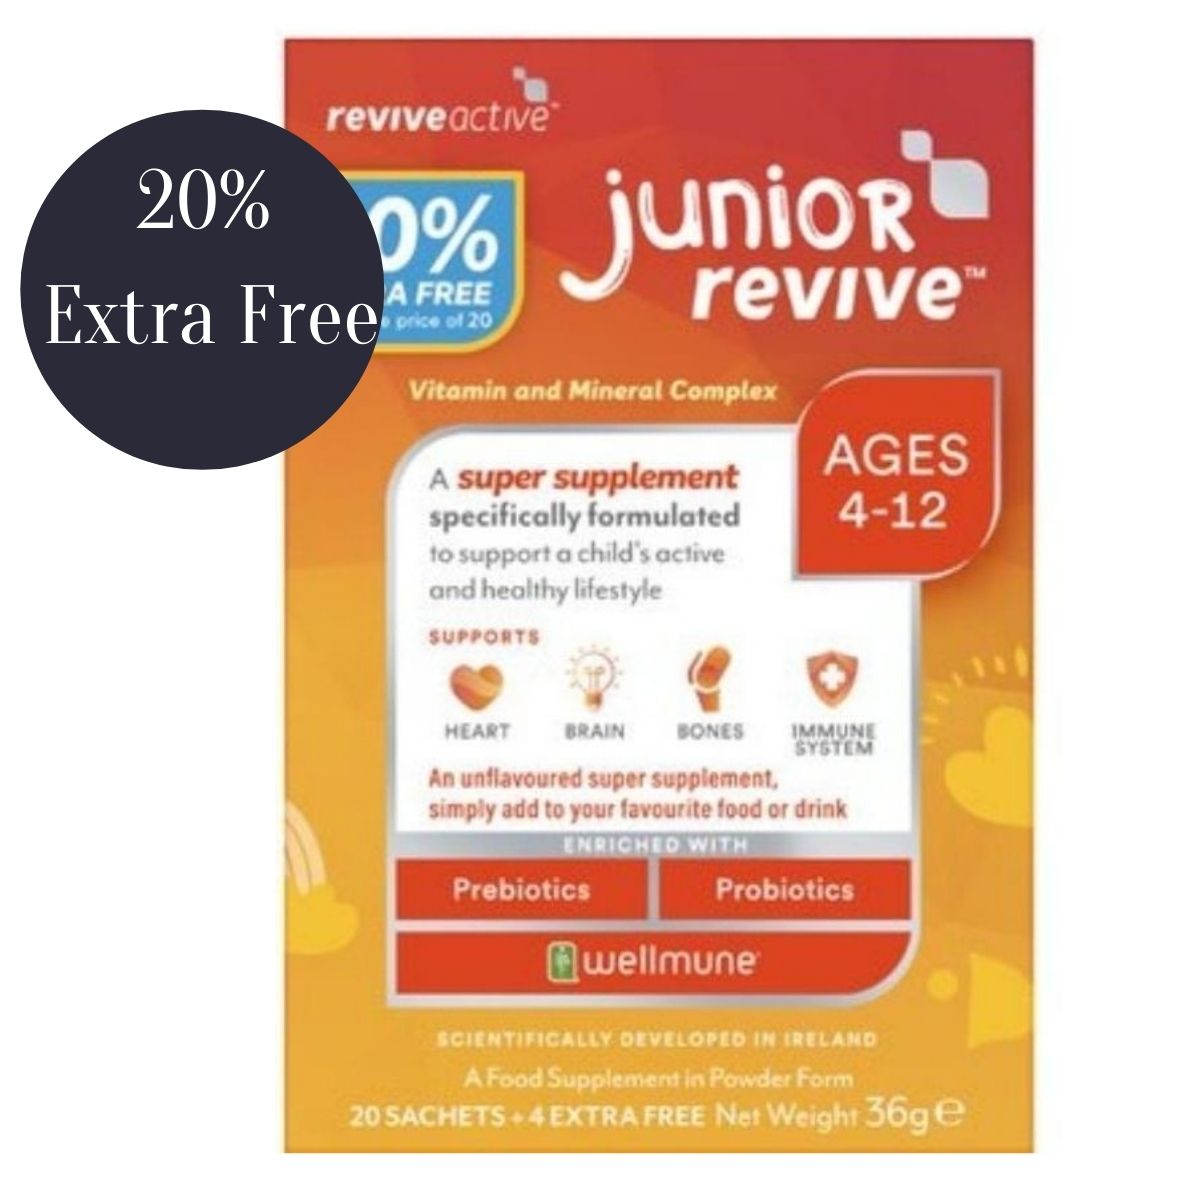 Revive Active Junior Revive 20% EXTRA FREE